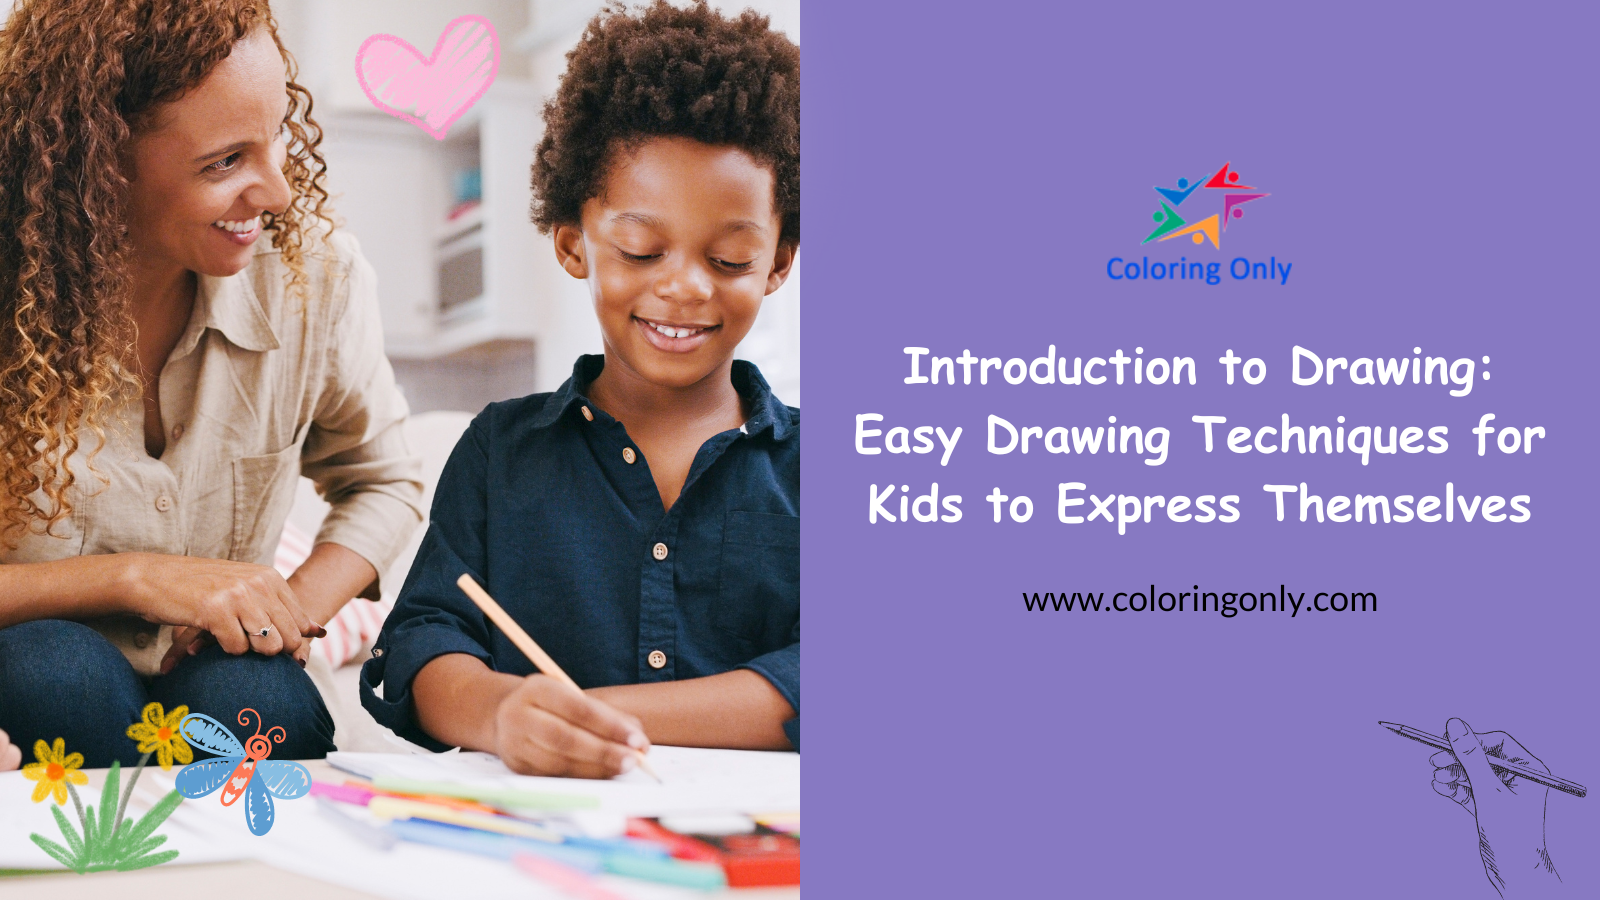 Introduction to Drawing: Easy Drawing Techniques for Kids to Express Themselves